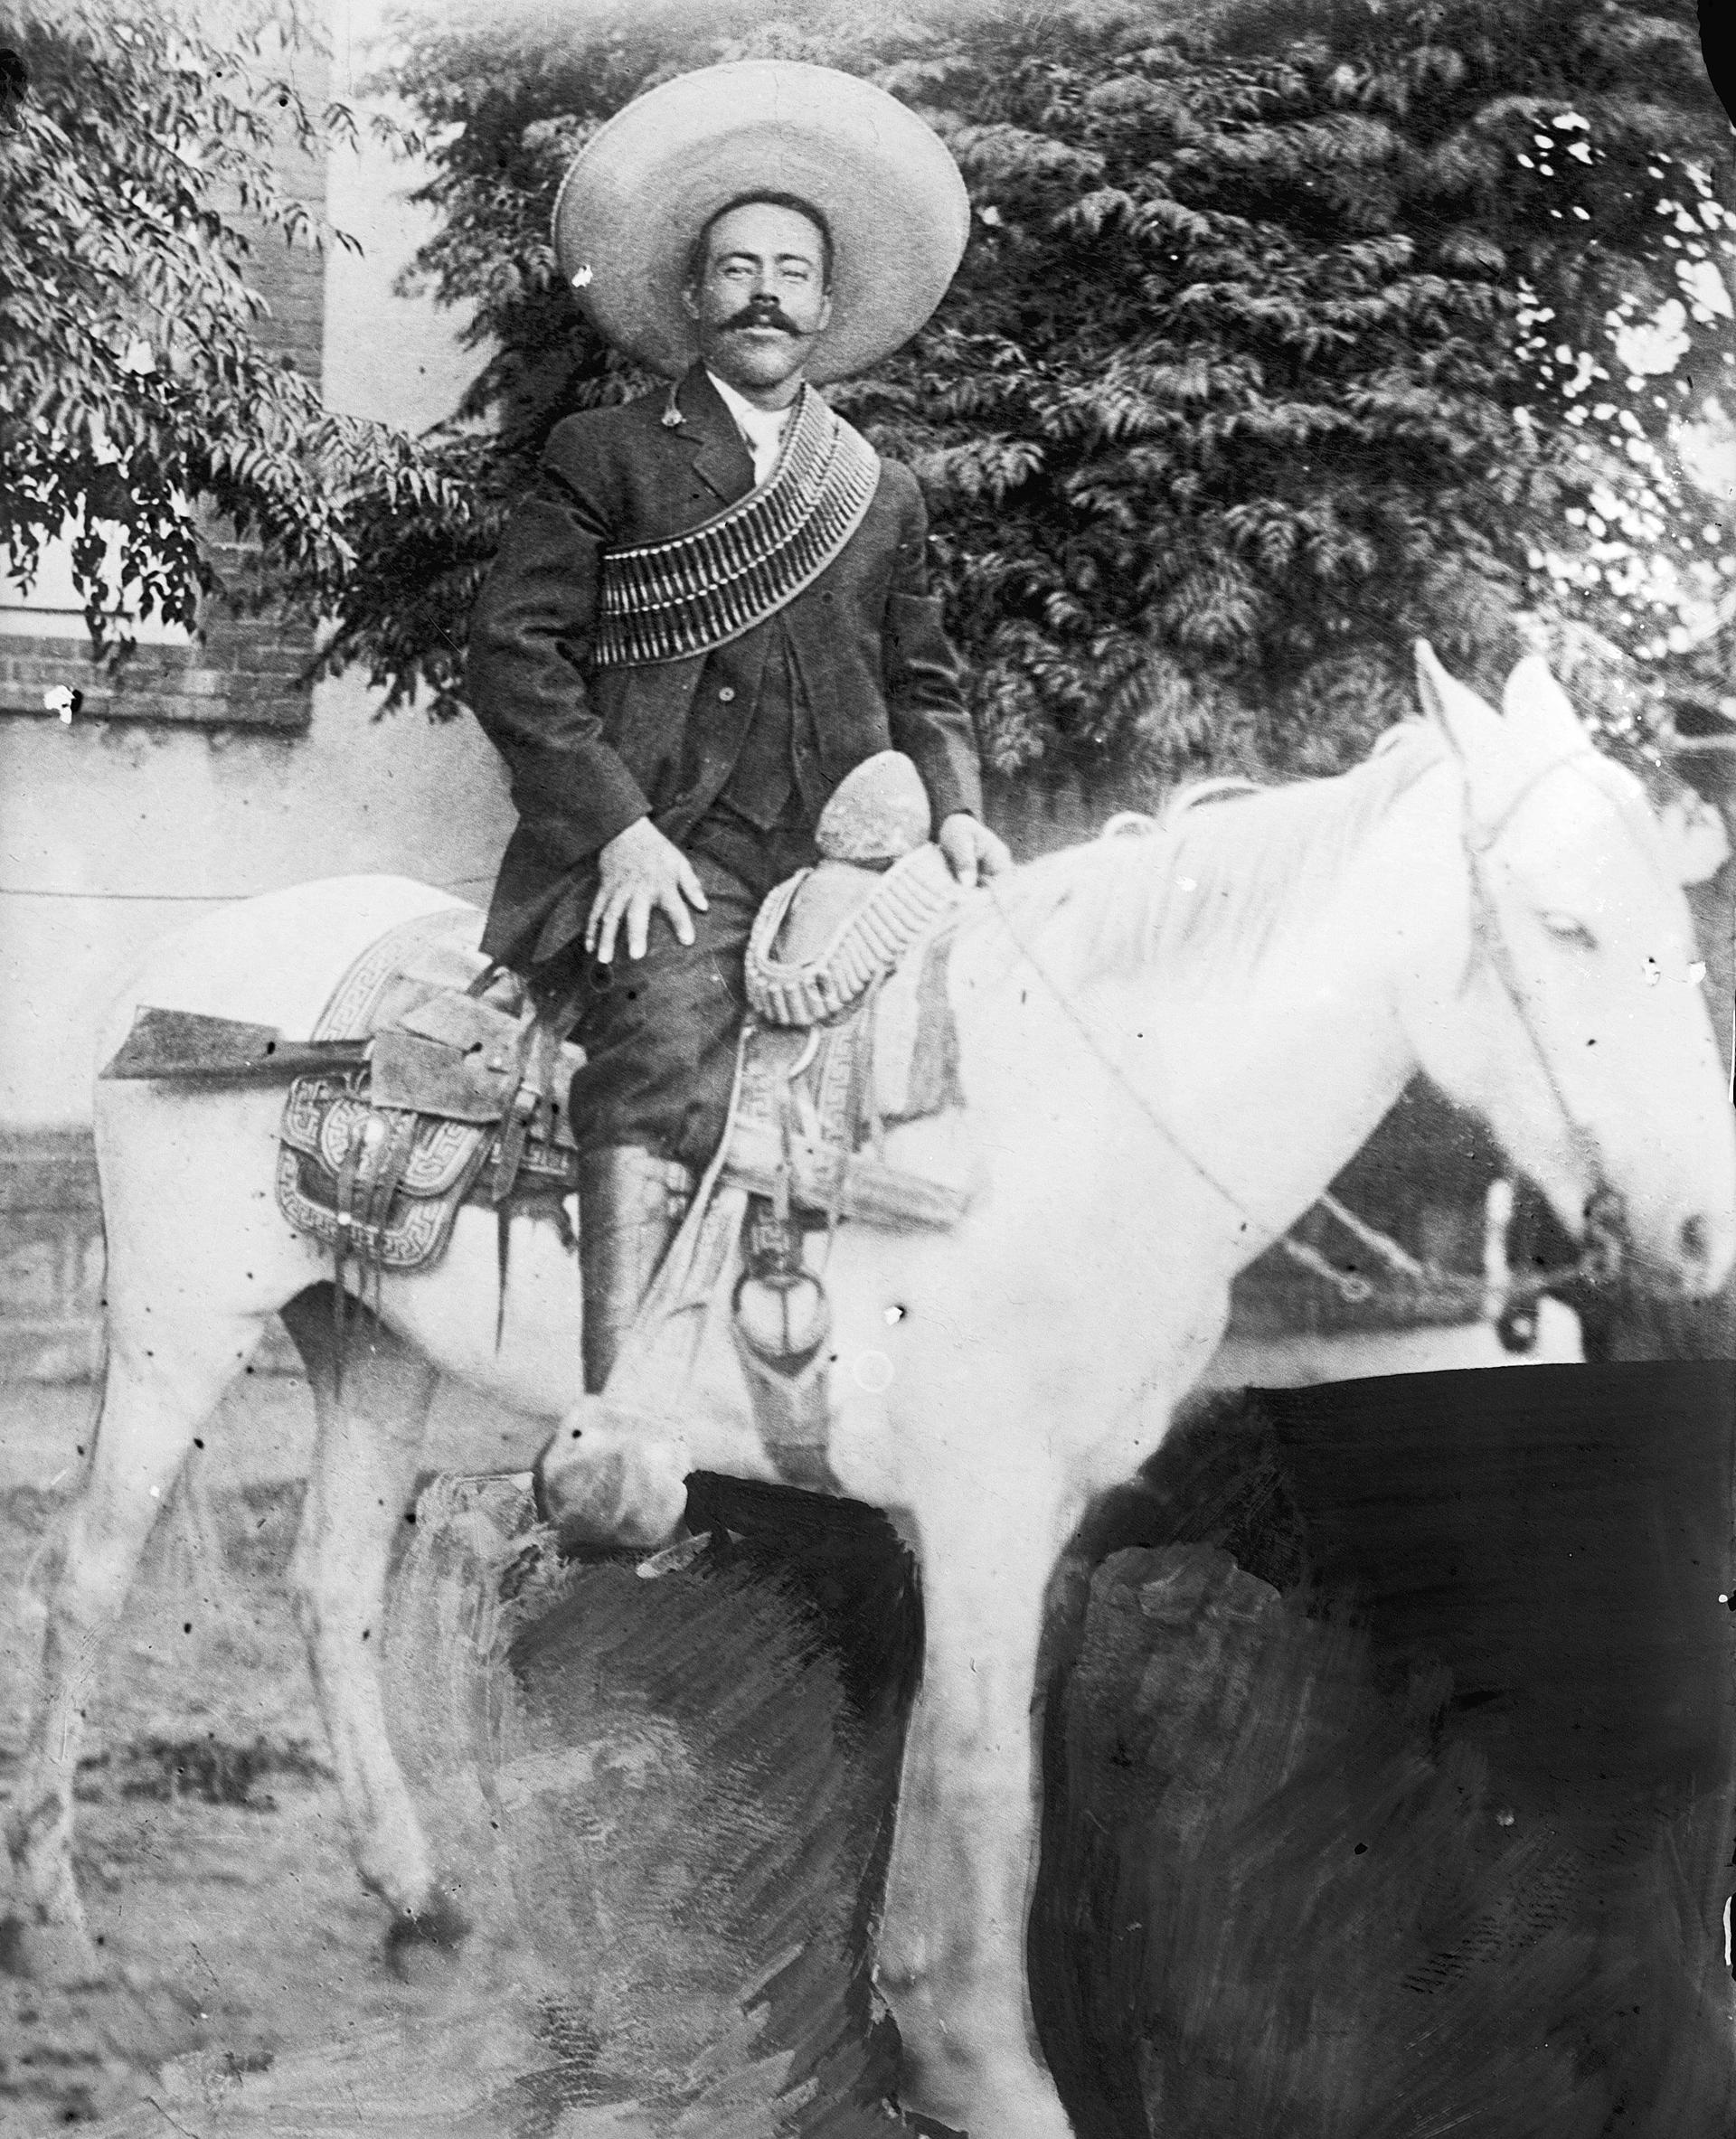 a black and white photograph of Pancho Villa on a white horse